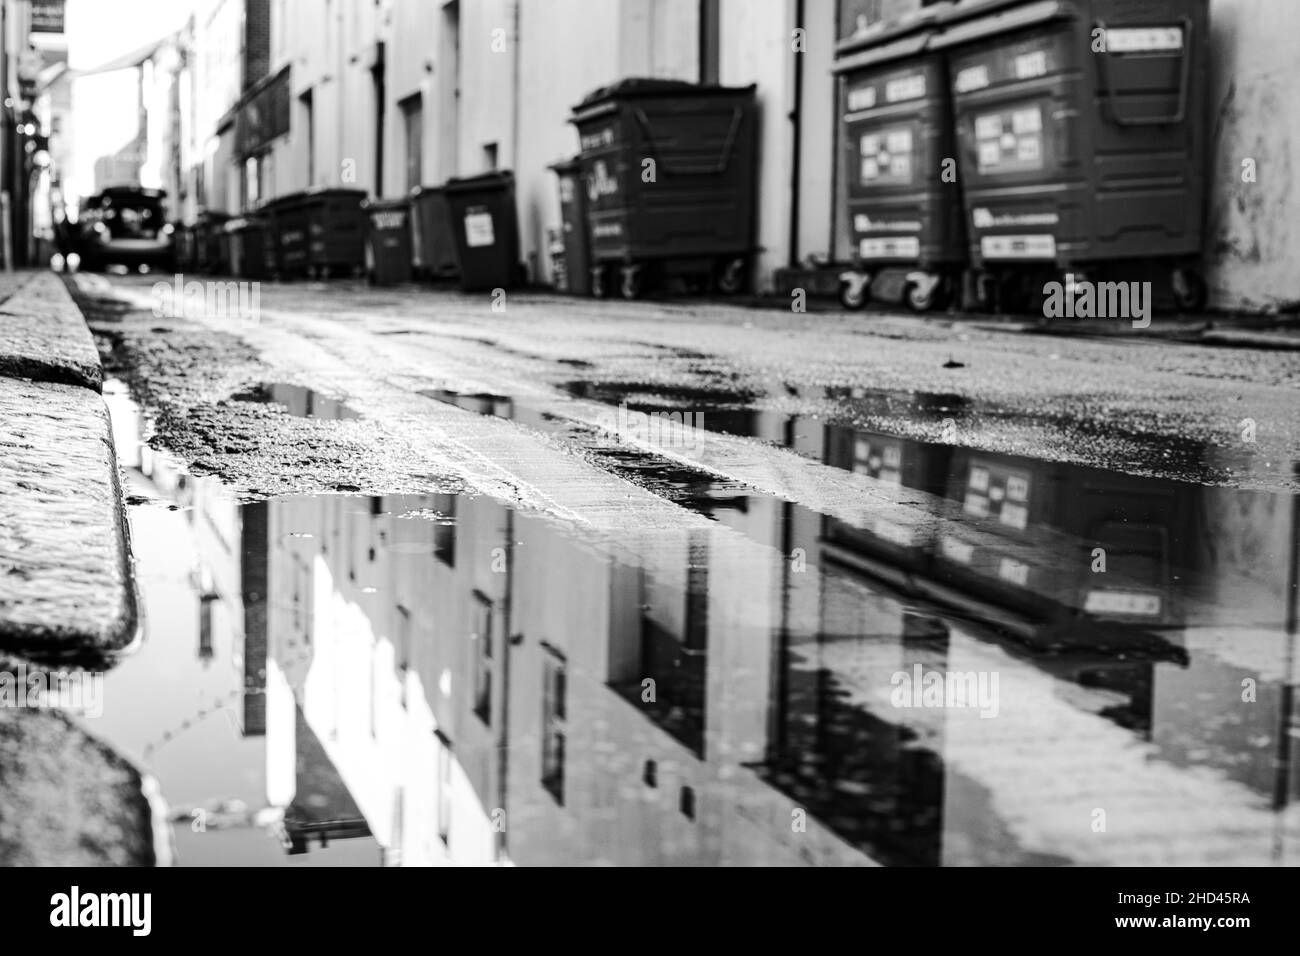 Grayscale image of a puddle on a street with a reflection of buildings and the sky Stock Photo